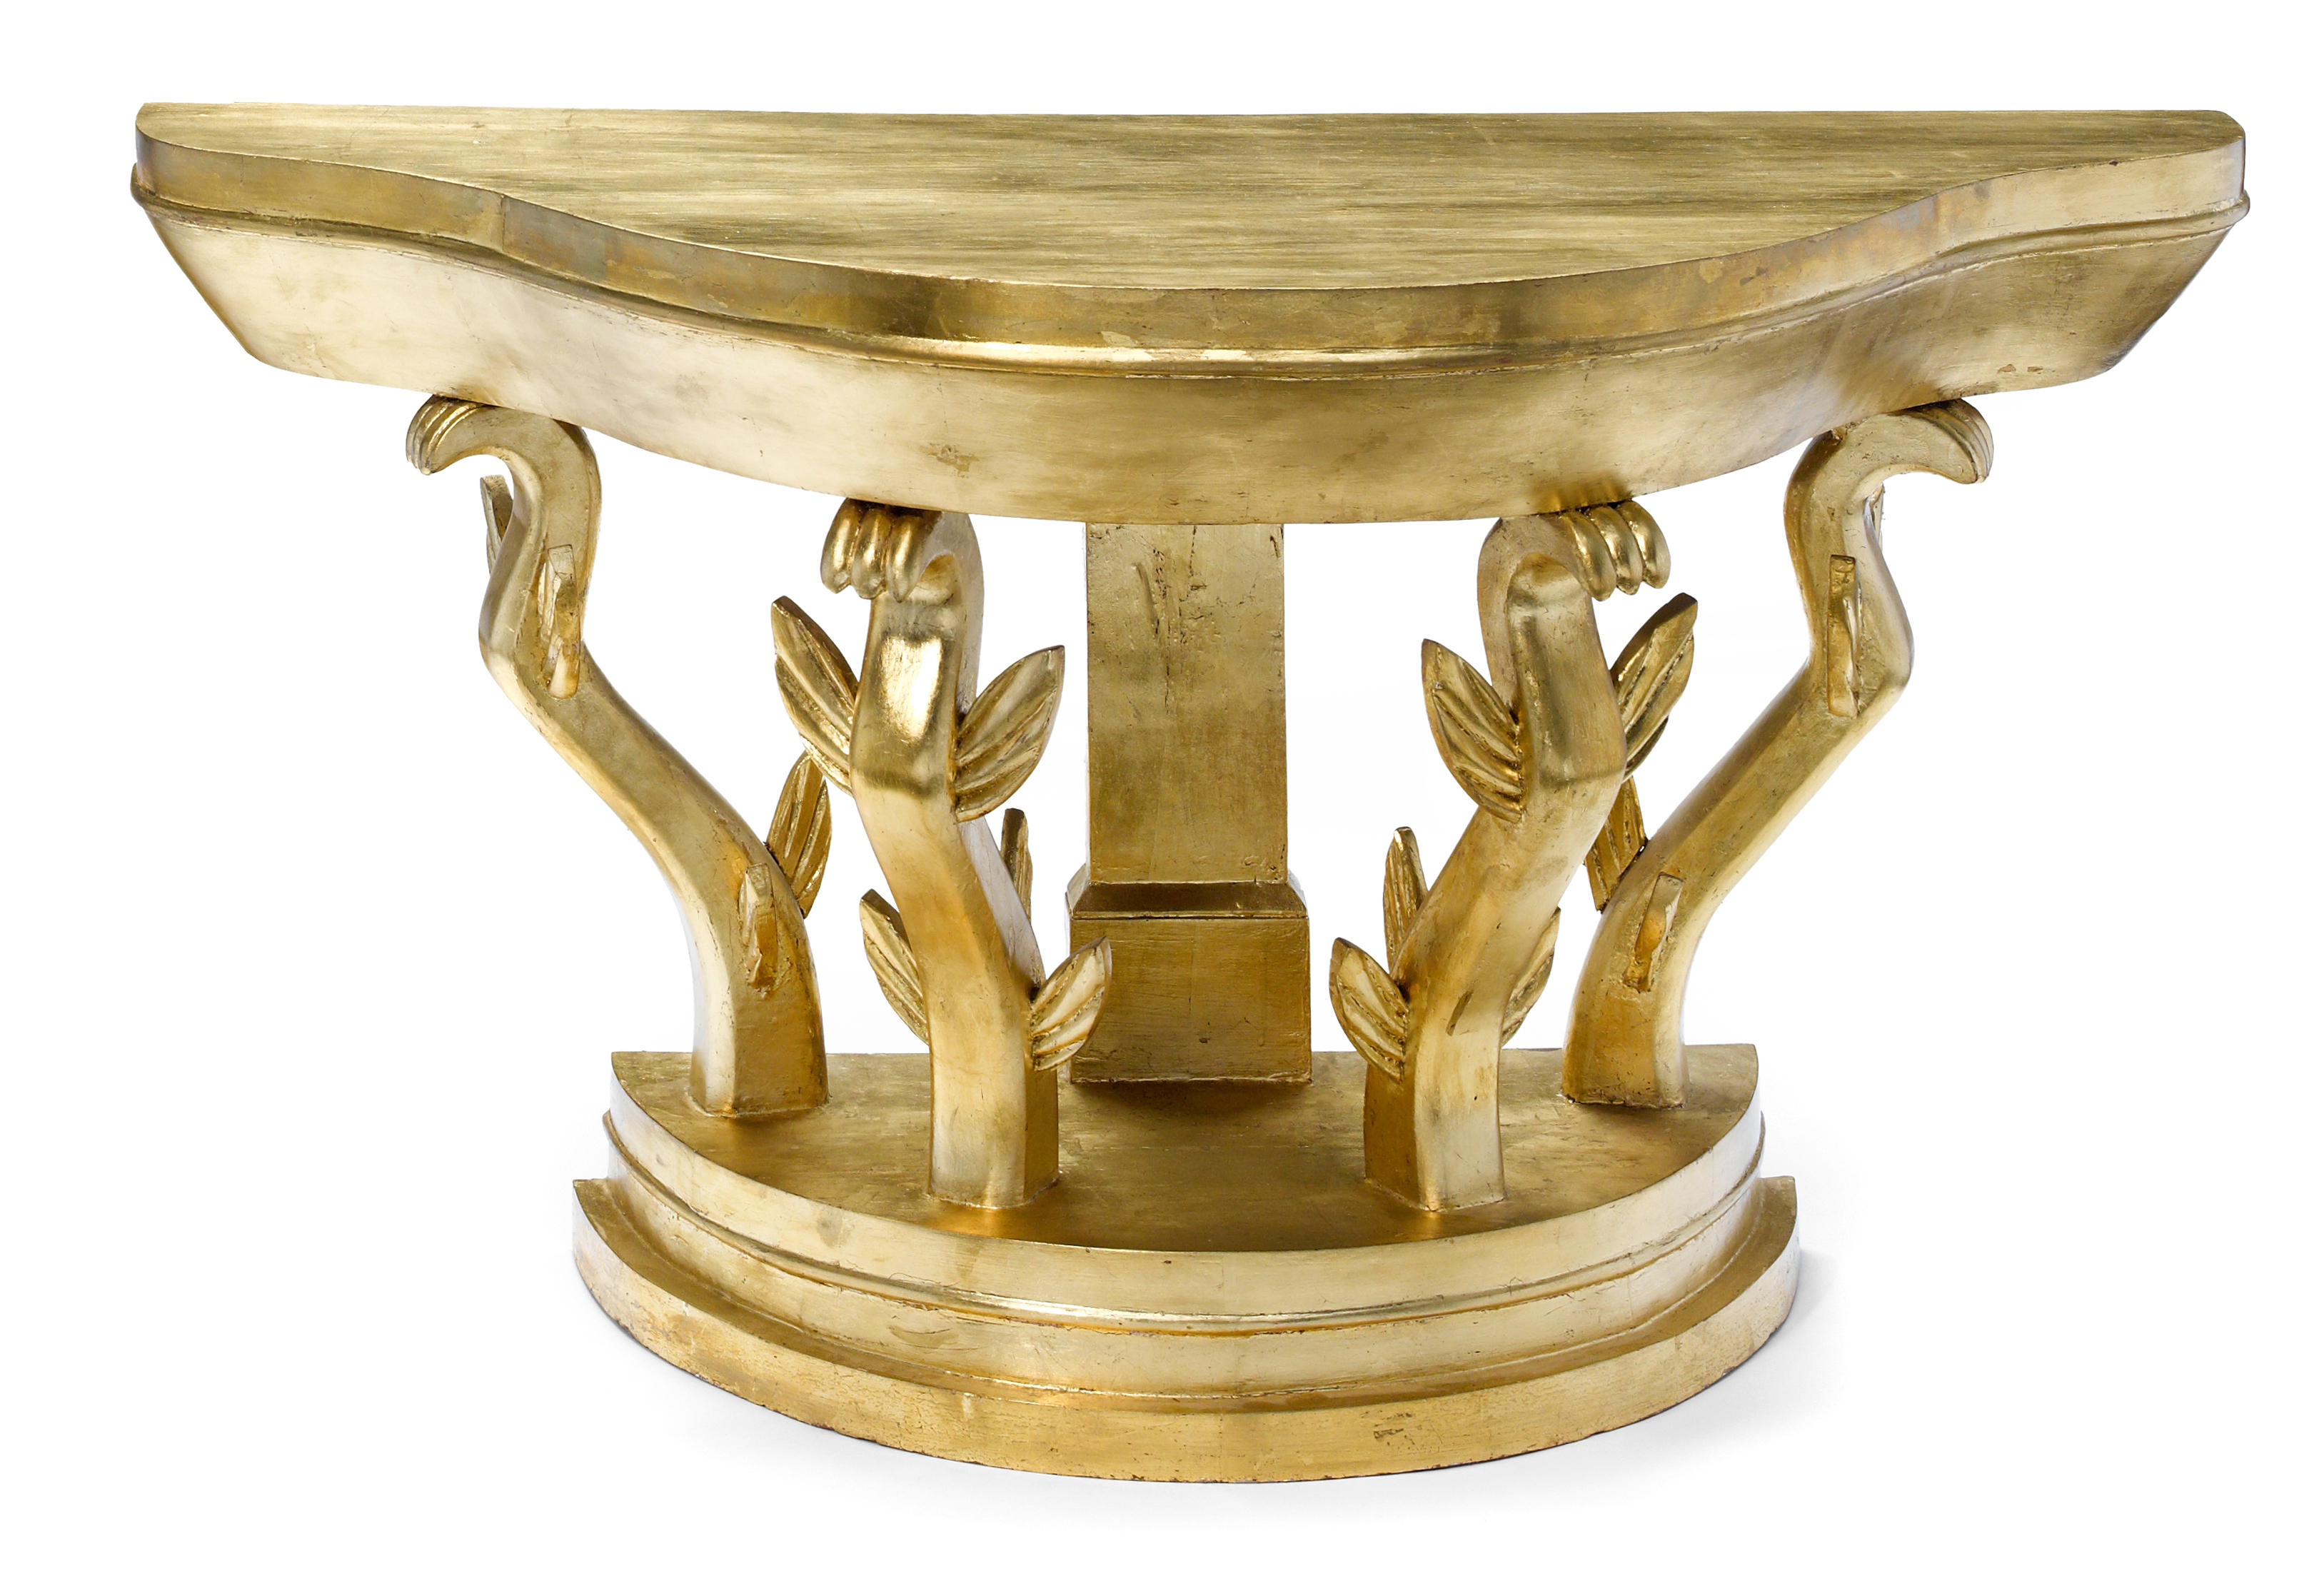 A gold leafed wood demilune console 12b975